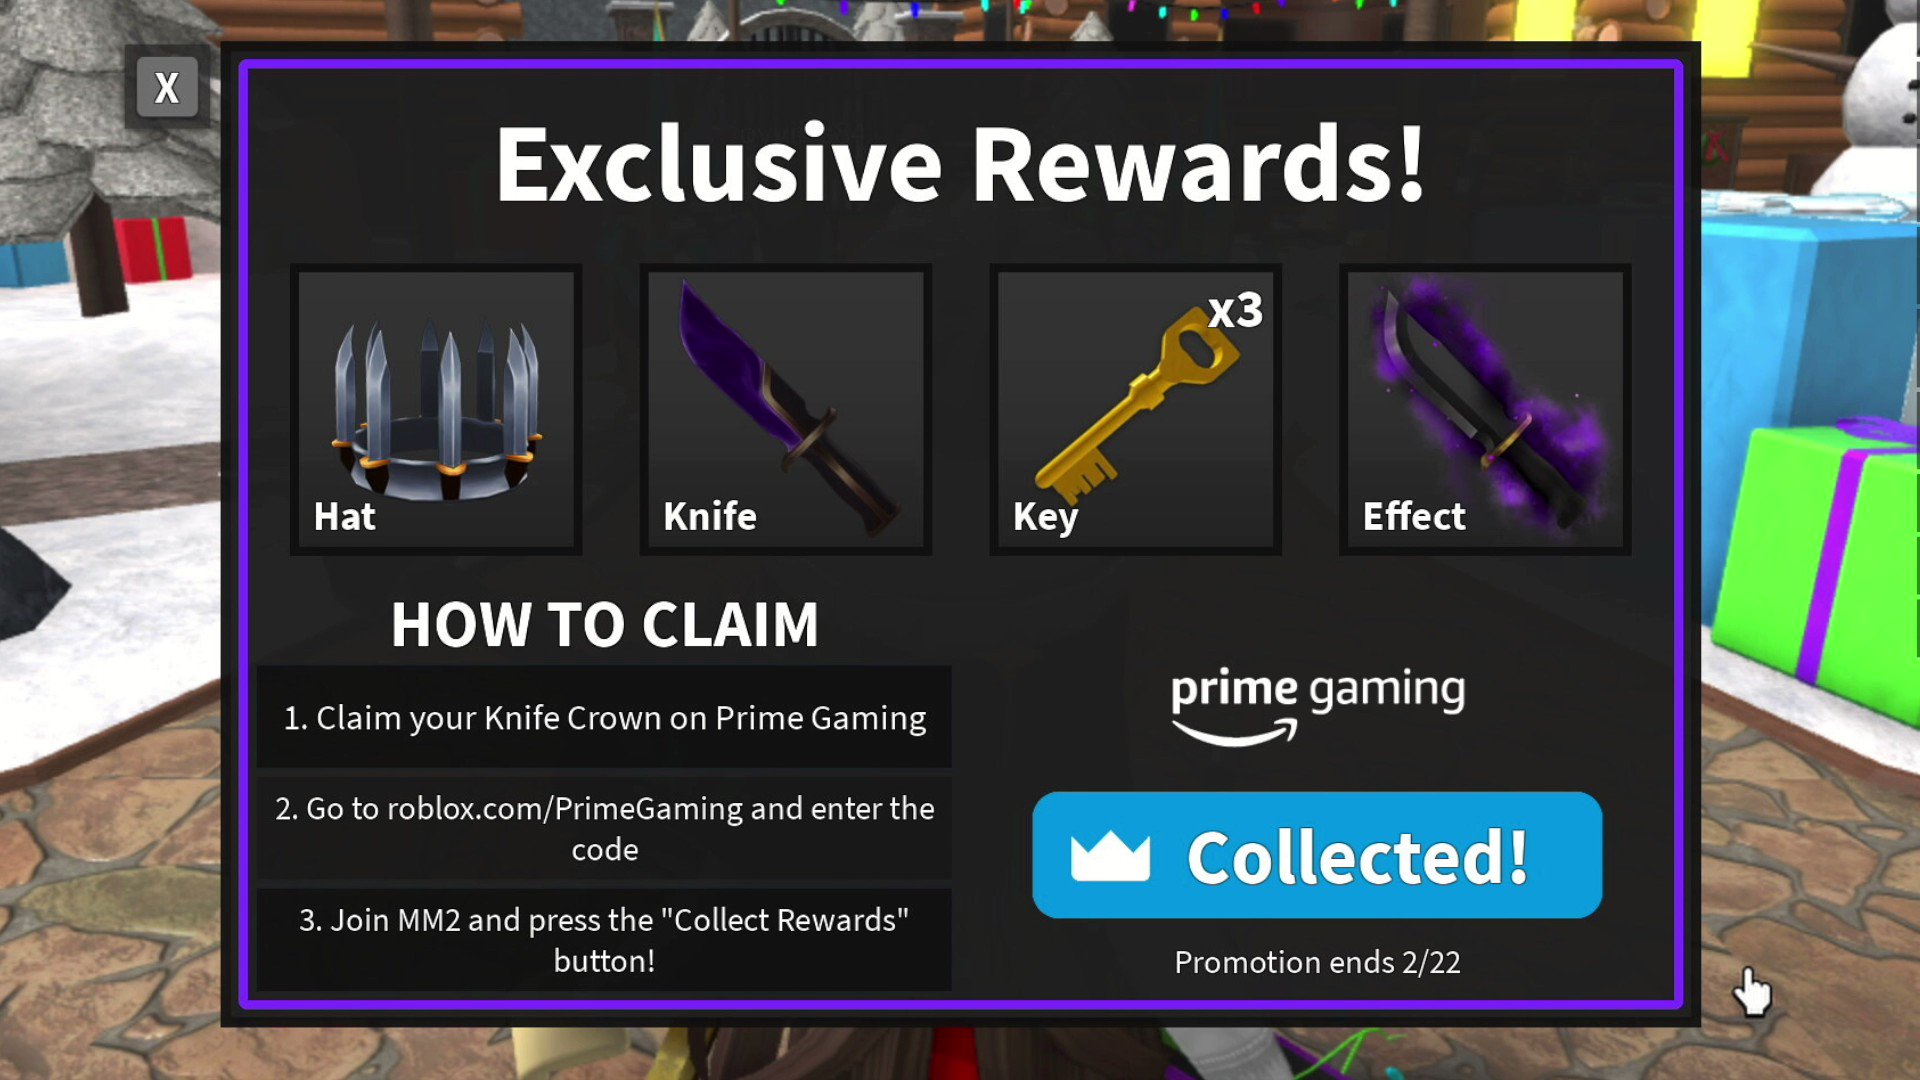 Colbe on X: We should be getting the MM2 Crown + Prime Gaming Rewards  Tomorrow! Today's the last day to get the current Prime Gaming item   / X